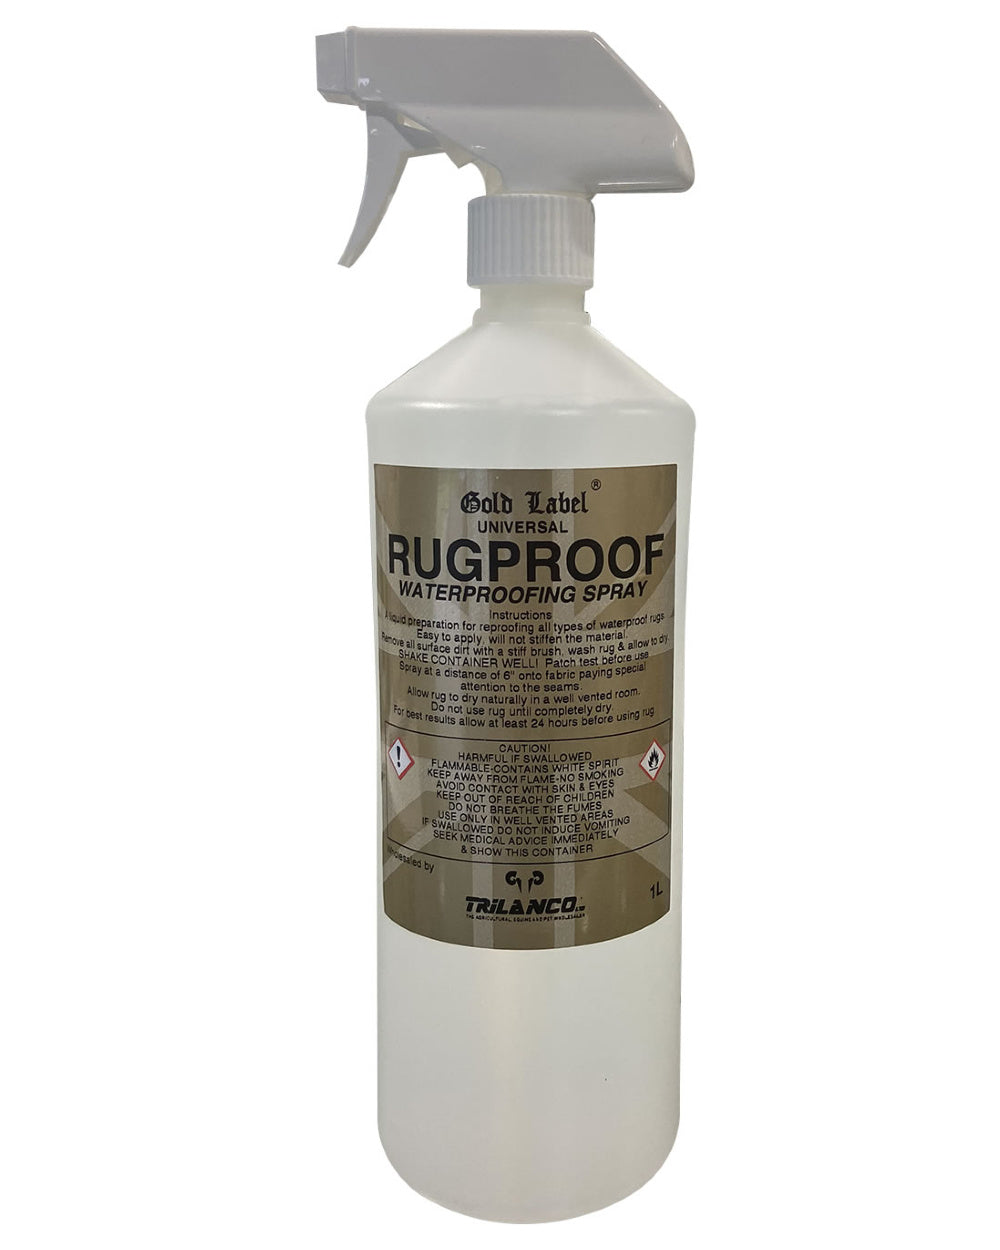 Gold Label Universal Rugproof Waterproofing Spray On A White Background